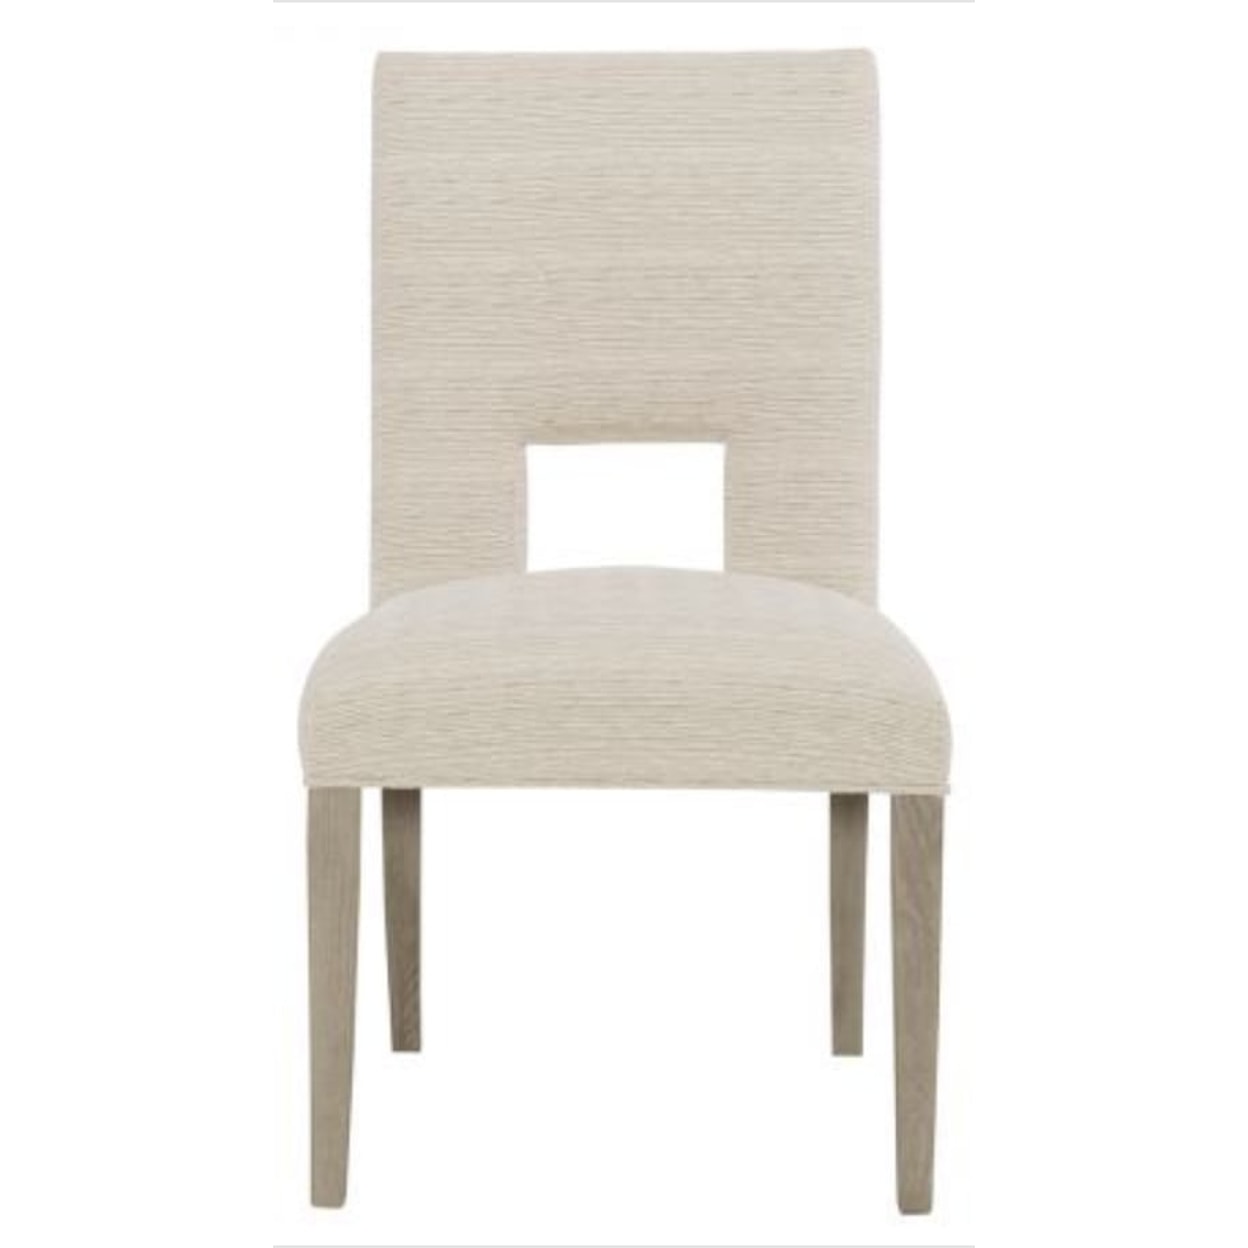 Bernhardt Chairs and Accents Mosaic Chair